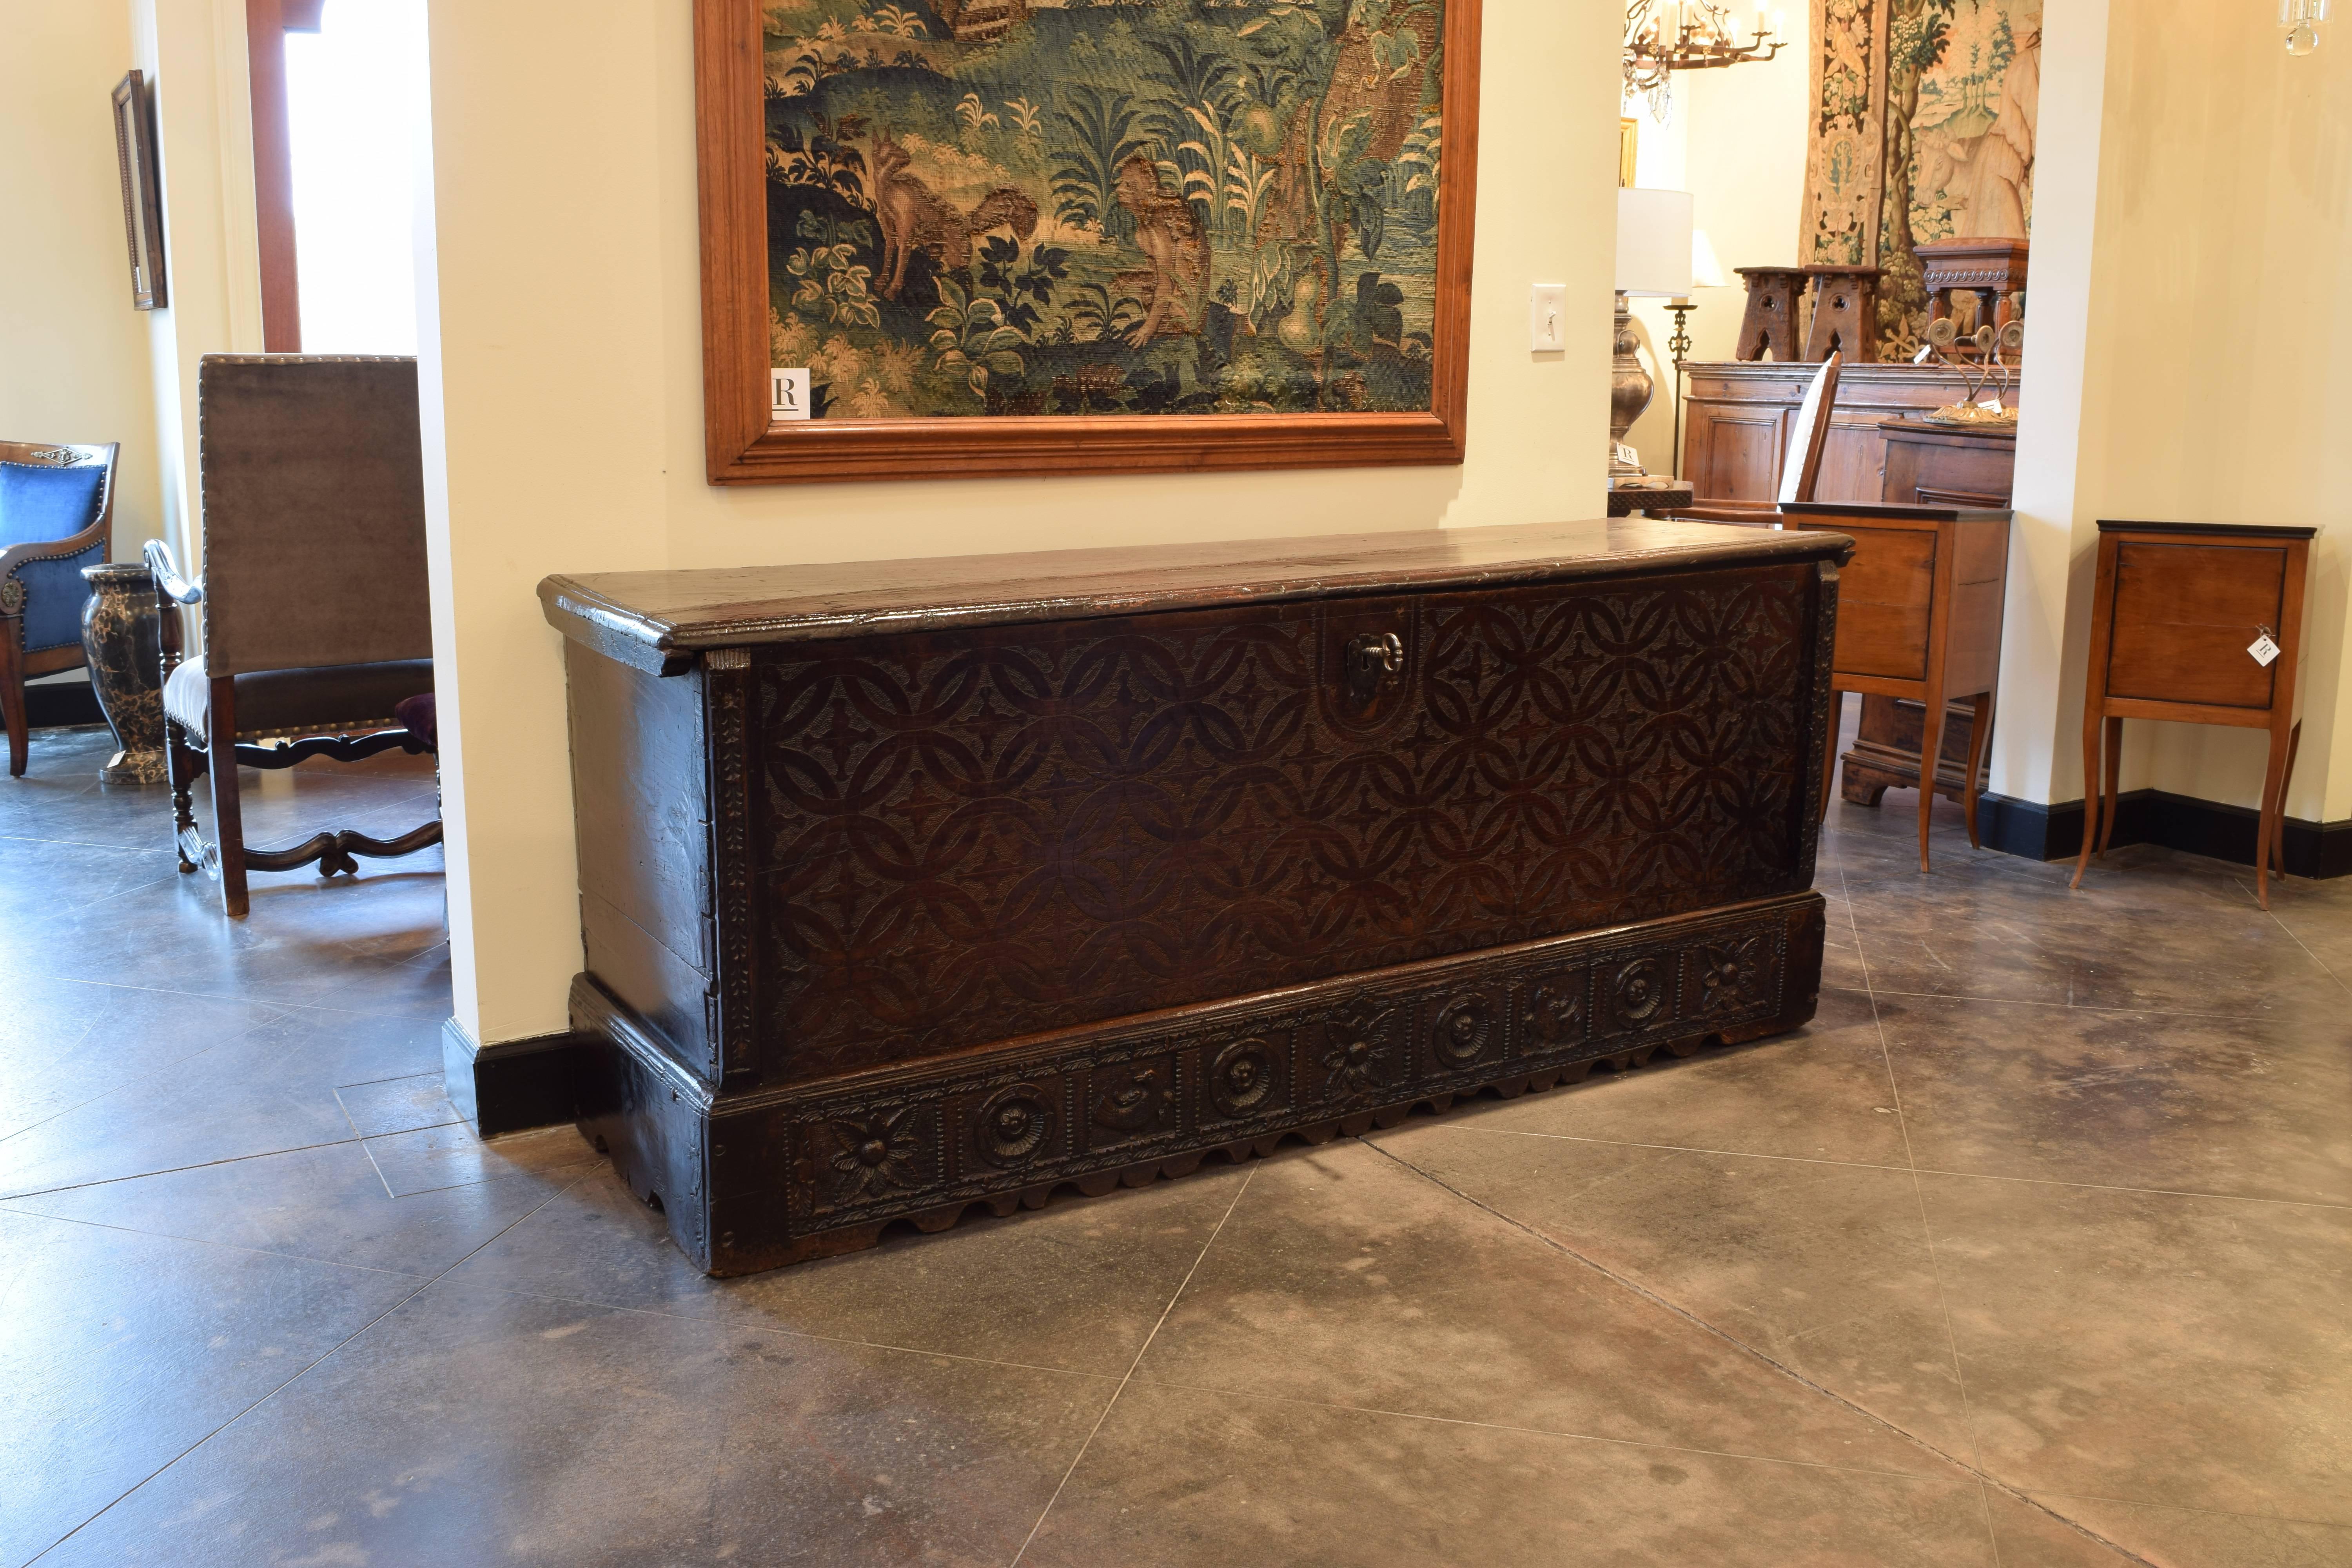 Walnut trunk with punched and carved Gothic details including florals, birds, and patterns.